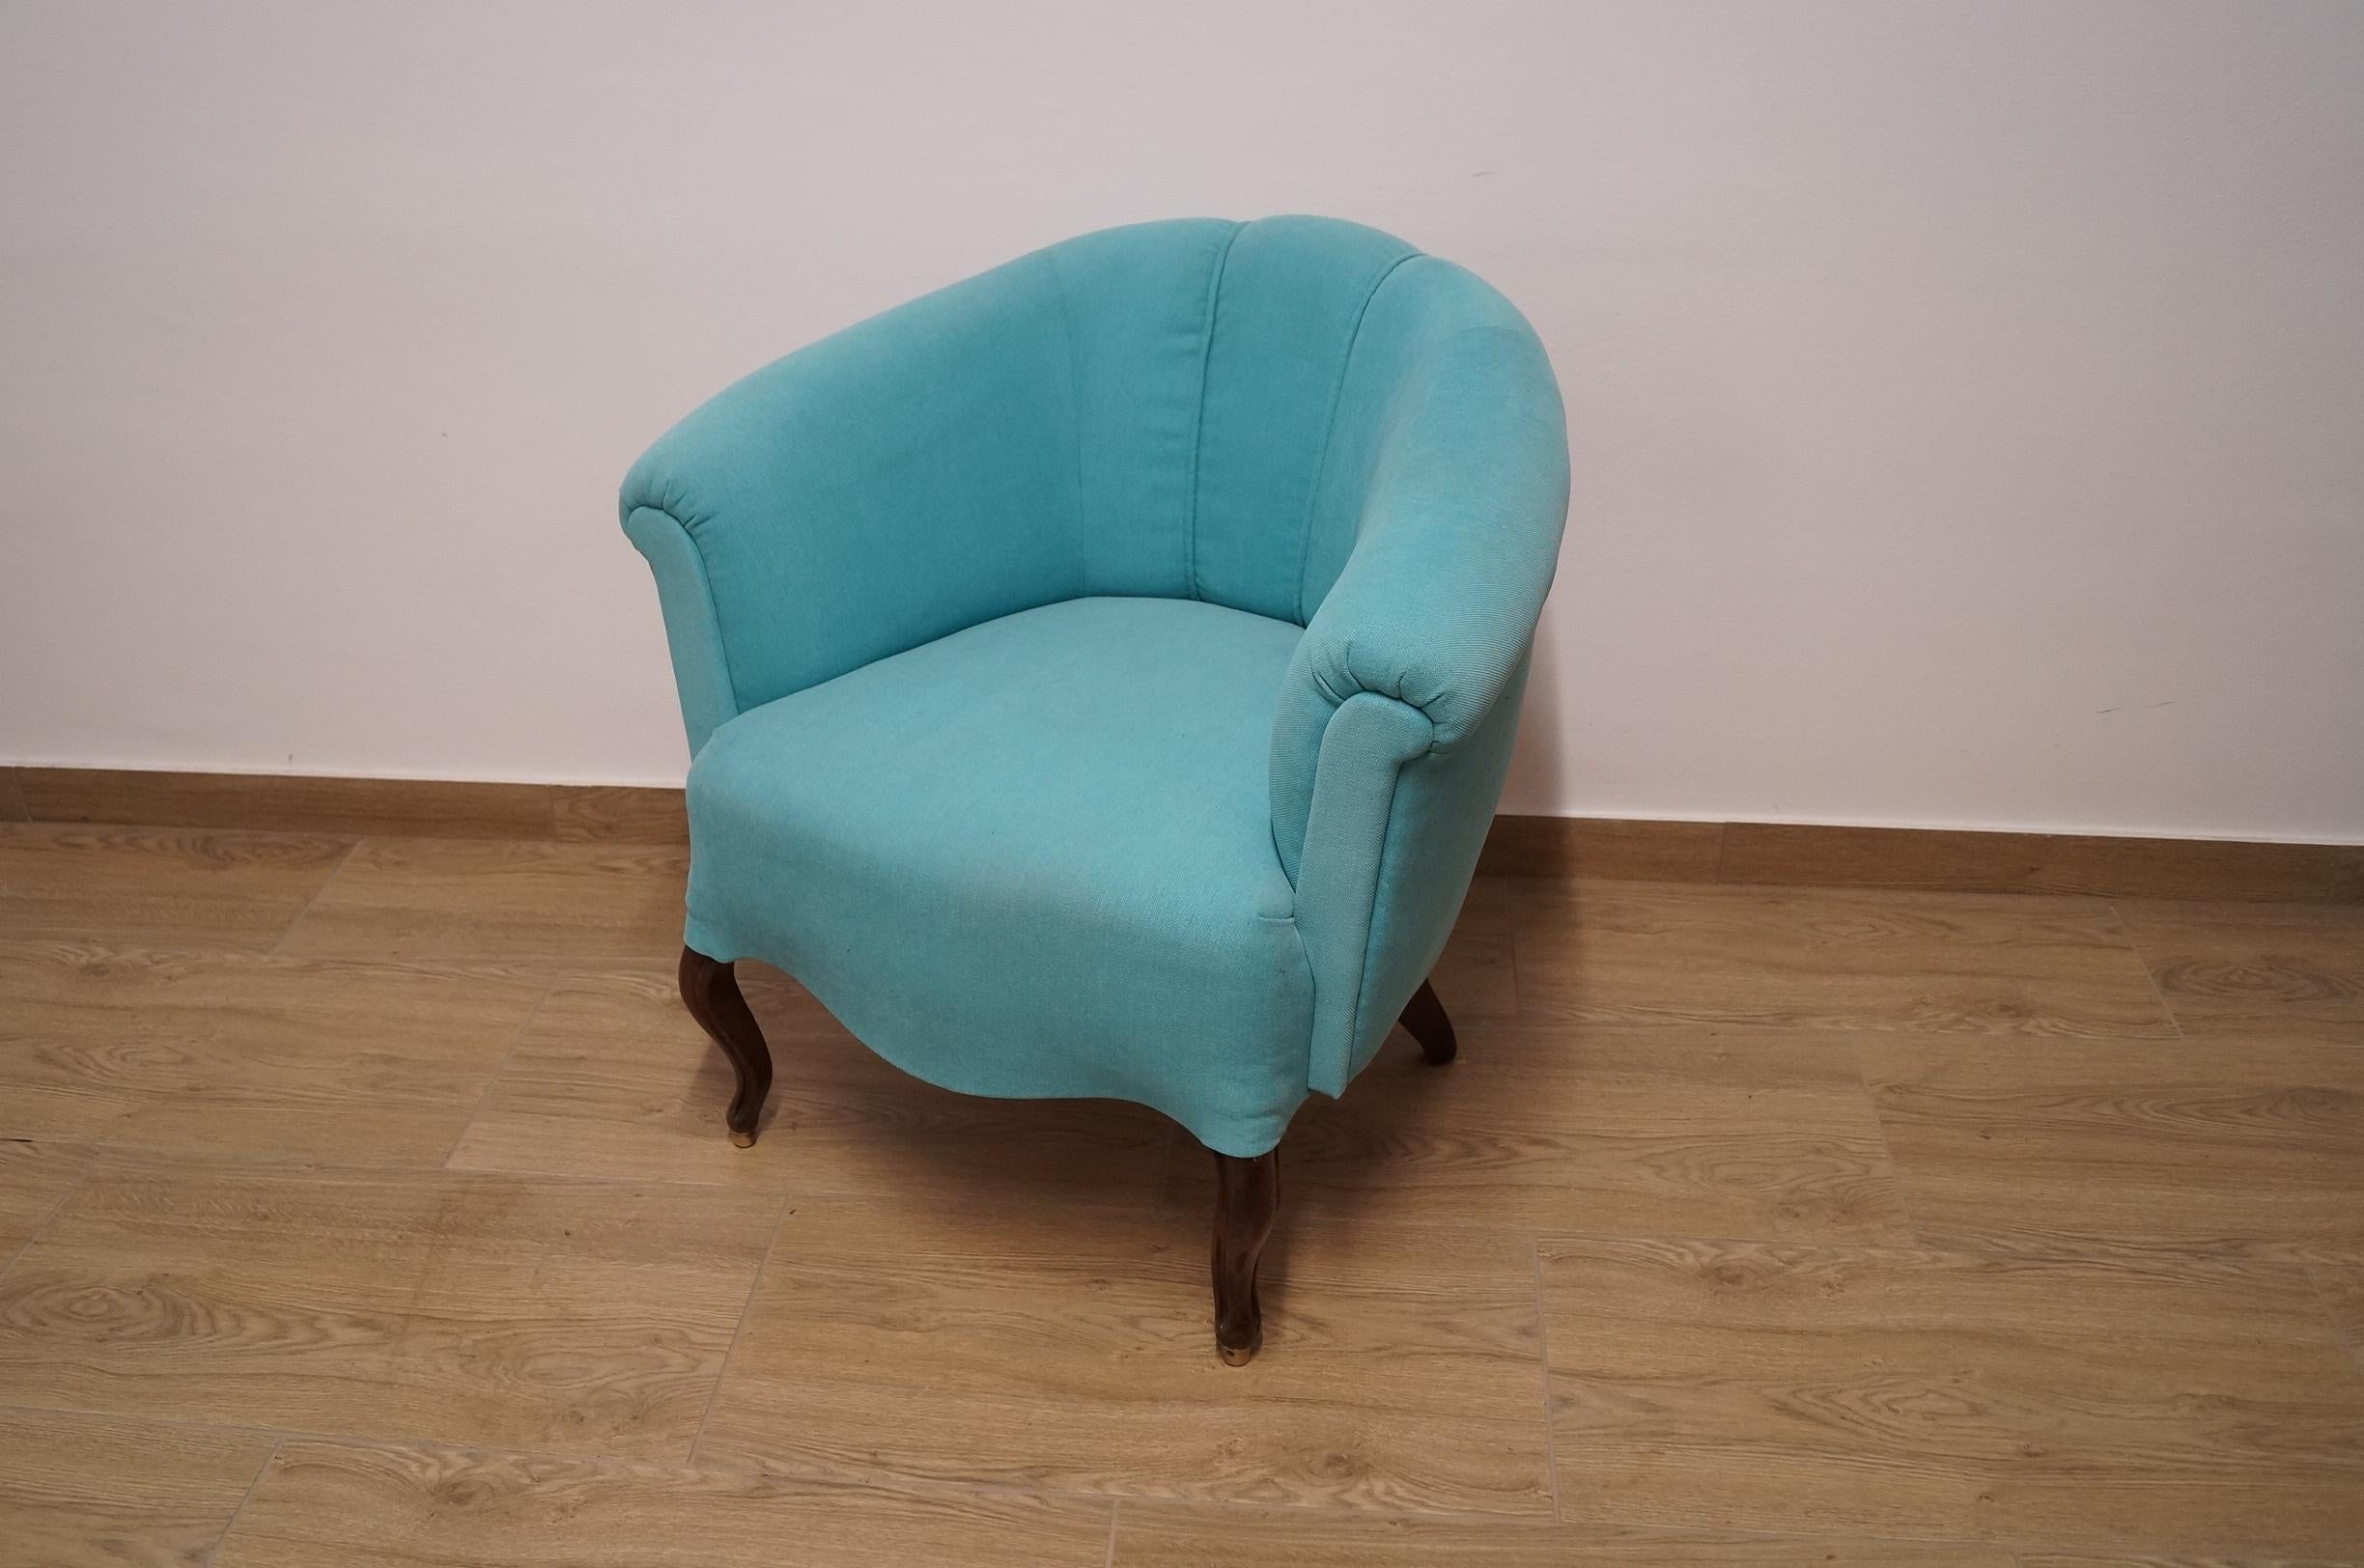 Louis xix chair 
Every piece of furniture that leaves our workshop from the beginning to the end is subjected to manual renovation, so as to restore its original condition from many years ago (It has been cleaned to bare veneer, disinfected and